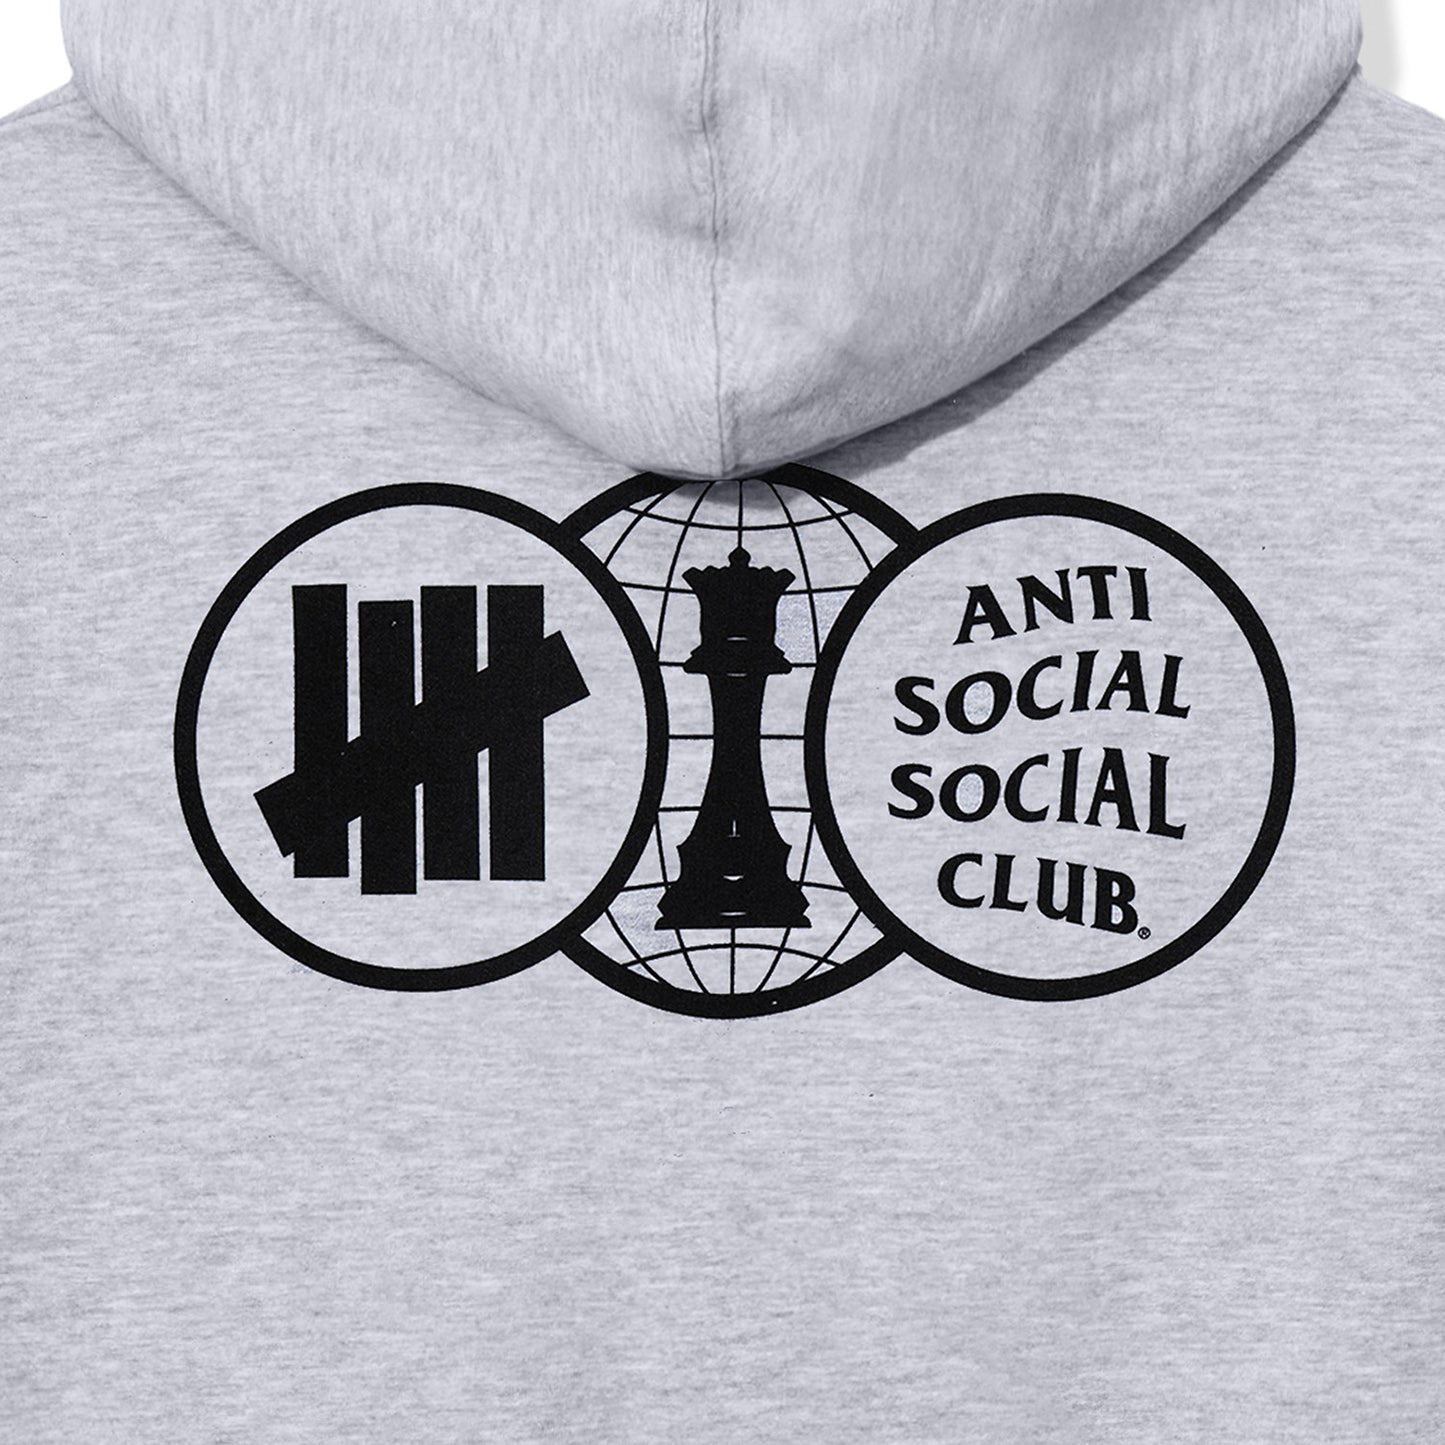 ASSC x Undefeated Position Hoodie - Athletic Heather